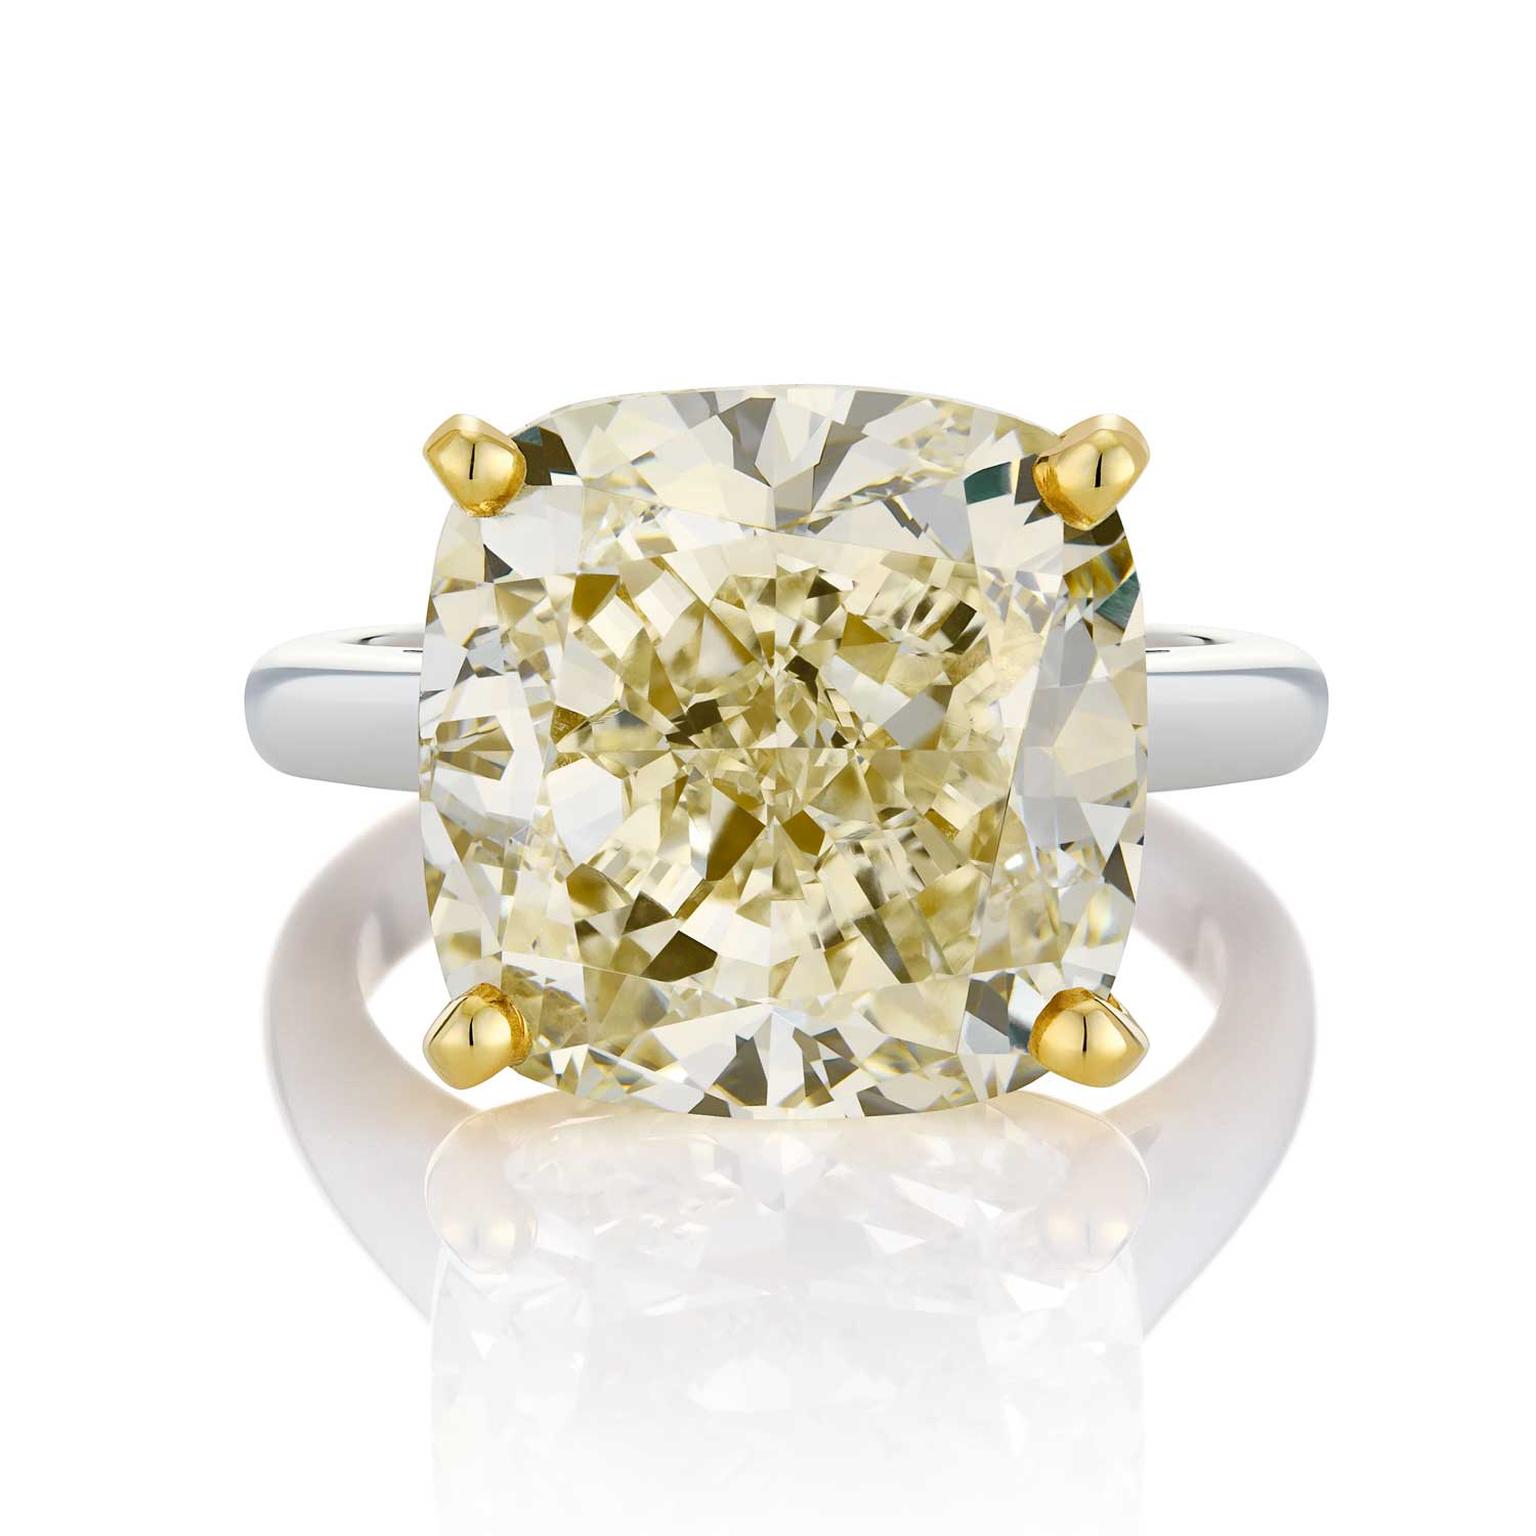 14.28ct cushion-cut X colour white diamond from De Beers 1888 Master Diamonds collection